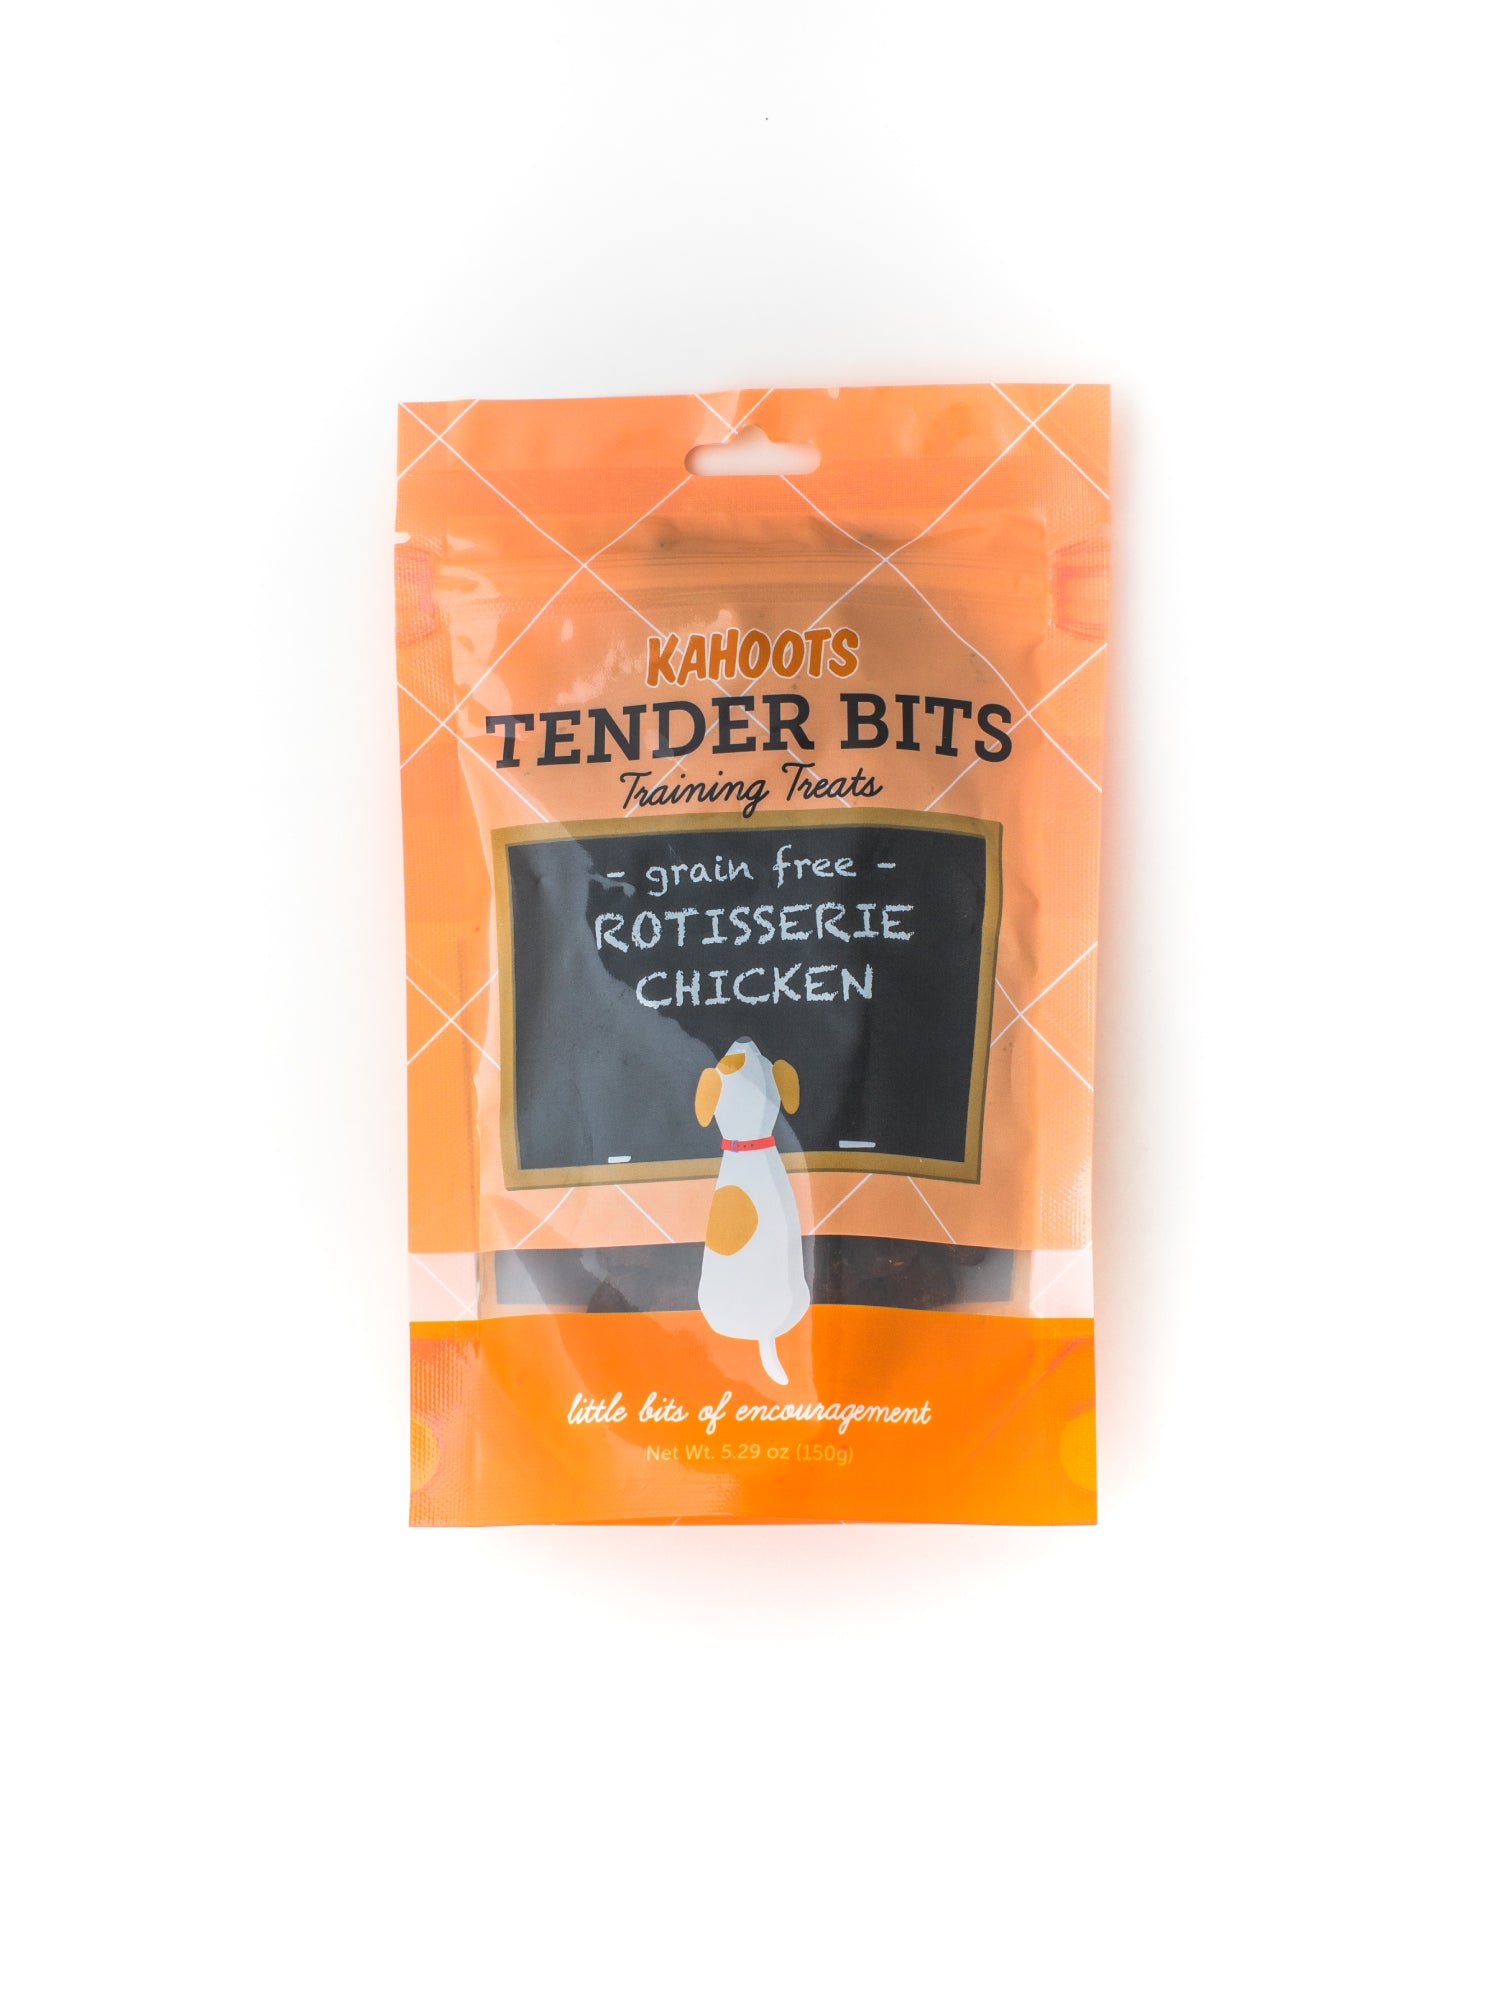 Chicken dog treats in a bag. Picture of a cartoon dog sitting in front of a chalk board over a orange background